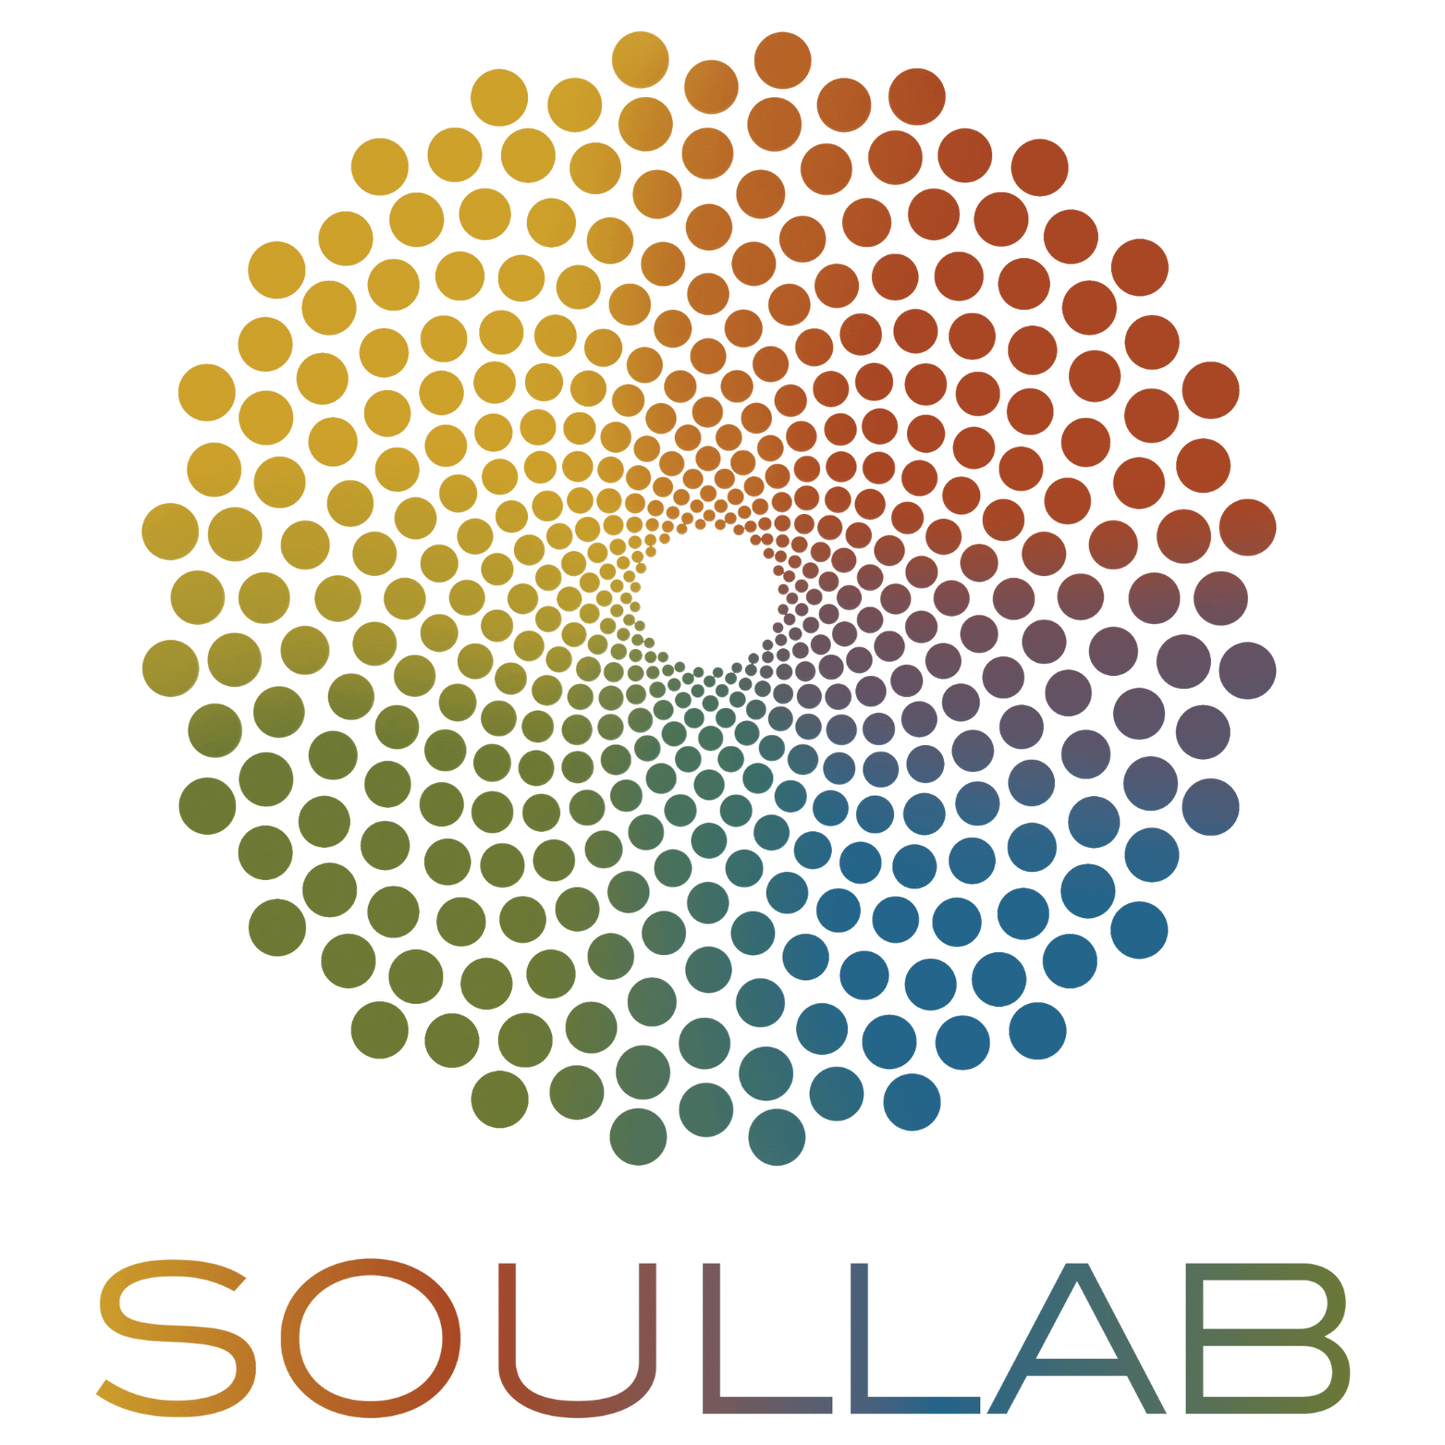 Give The Gift Of Soullab With Soullabs Own Gift Cards